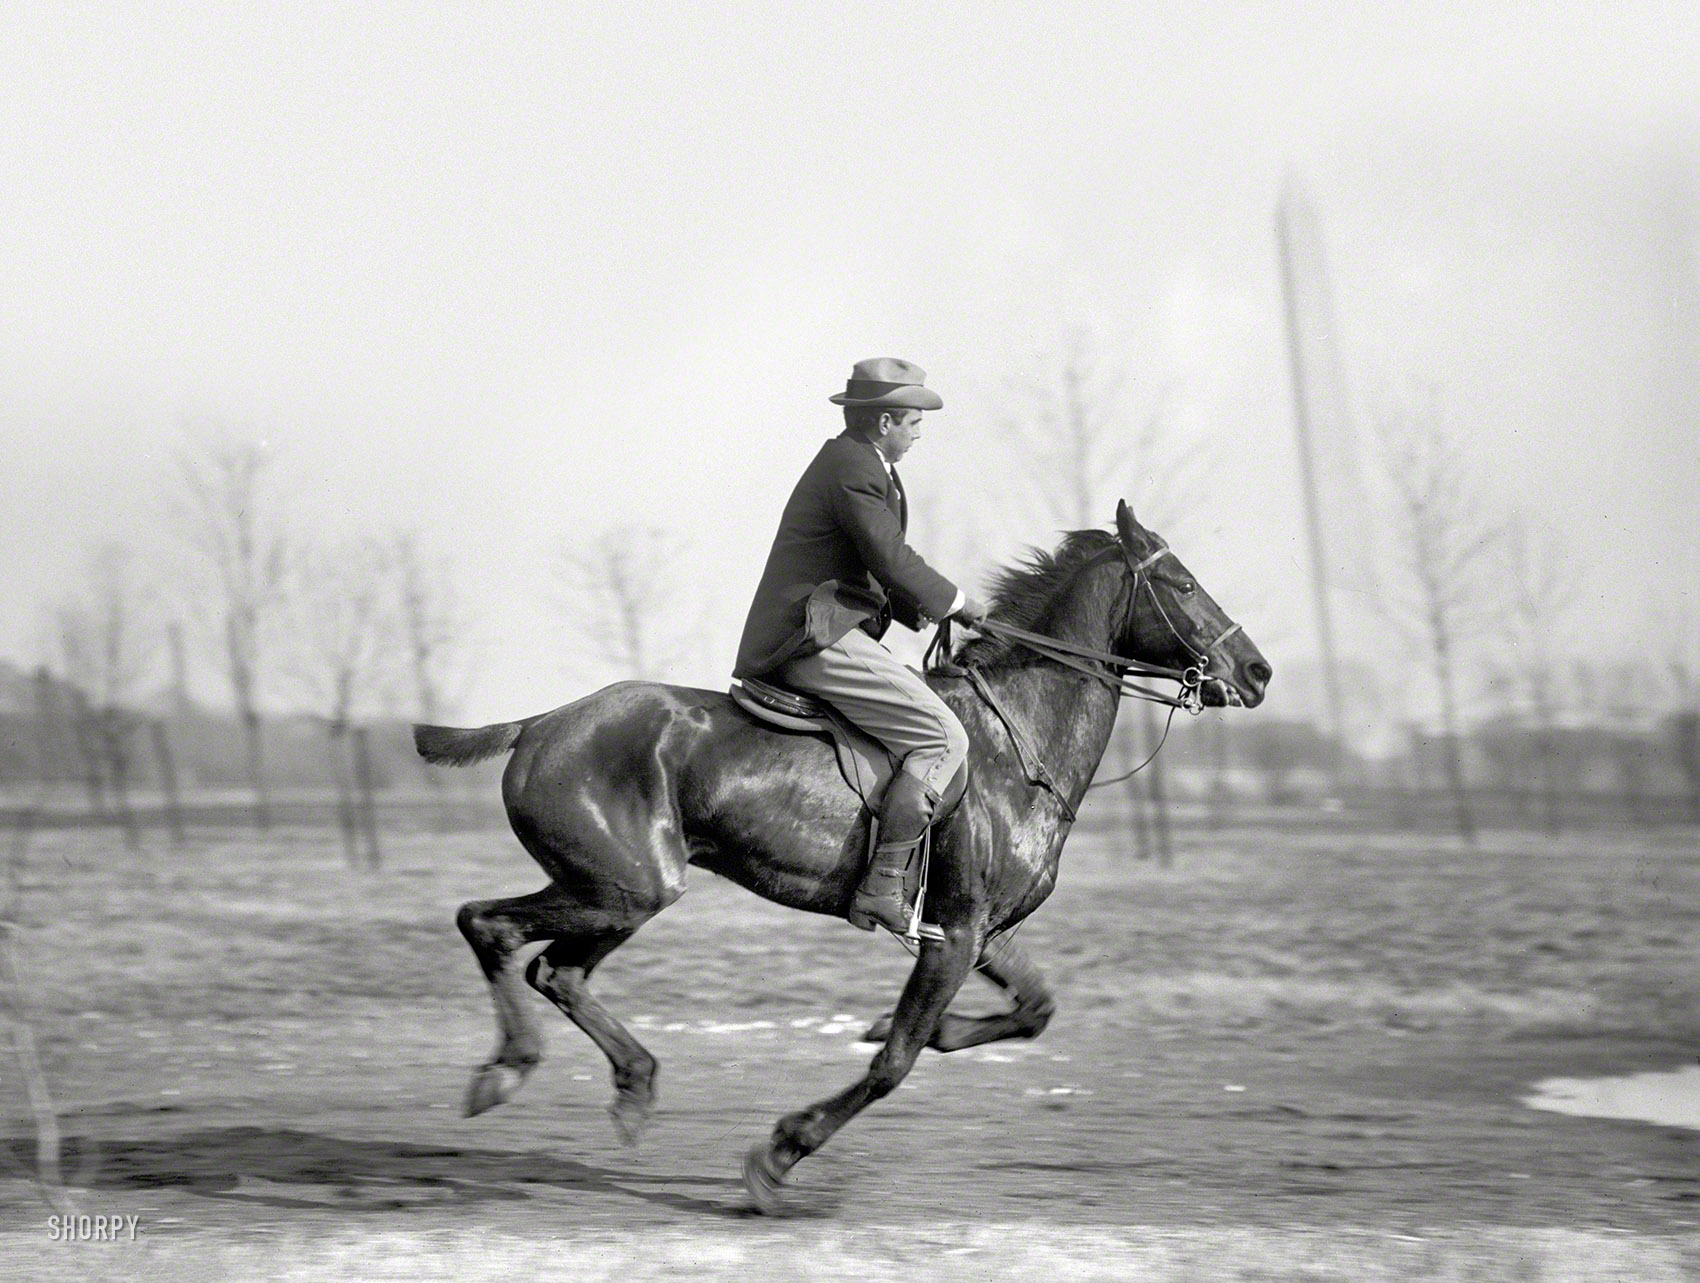 Washington, D.C., 1914. "Wrisley Brown, attorney, riding." You'll note the Washington Monument showing a decided tilt to the left, although the reason is more optical than political. Harris & Ewing glass negative. View full size.